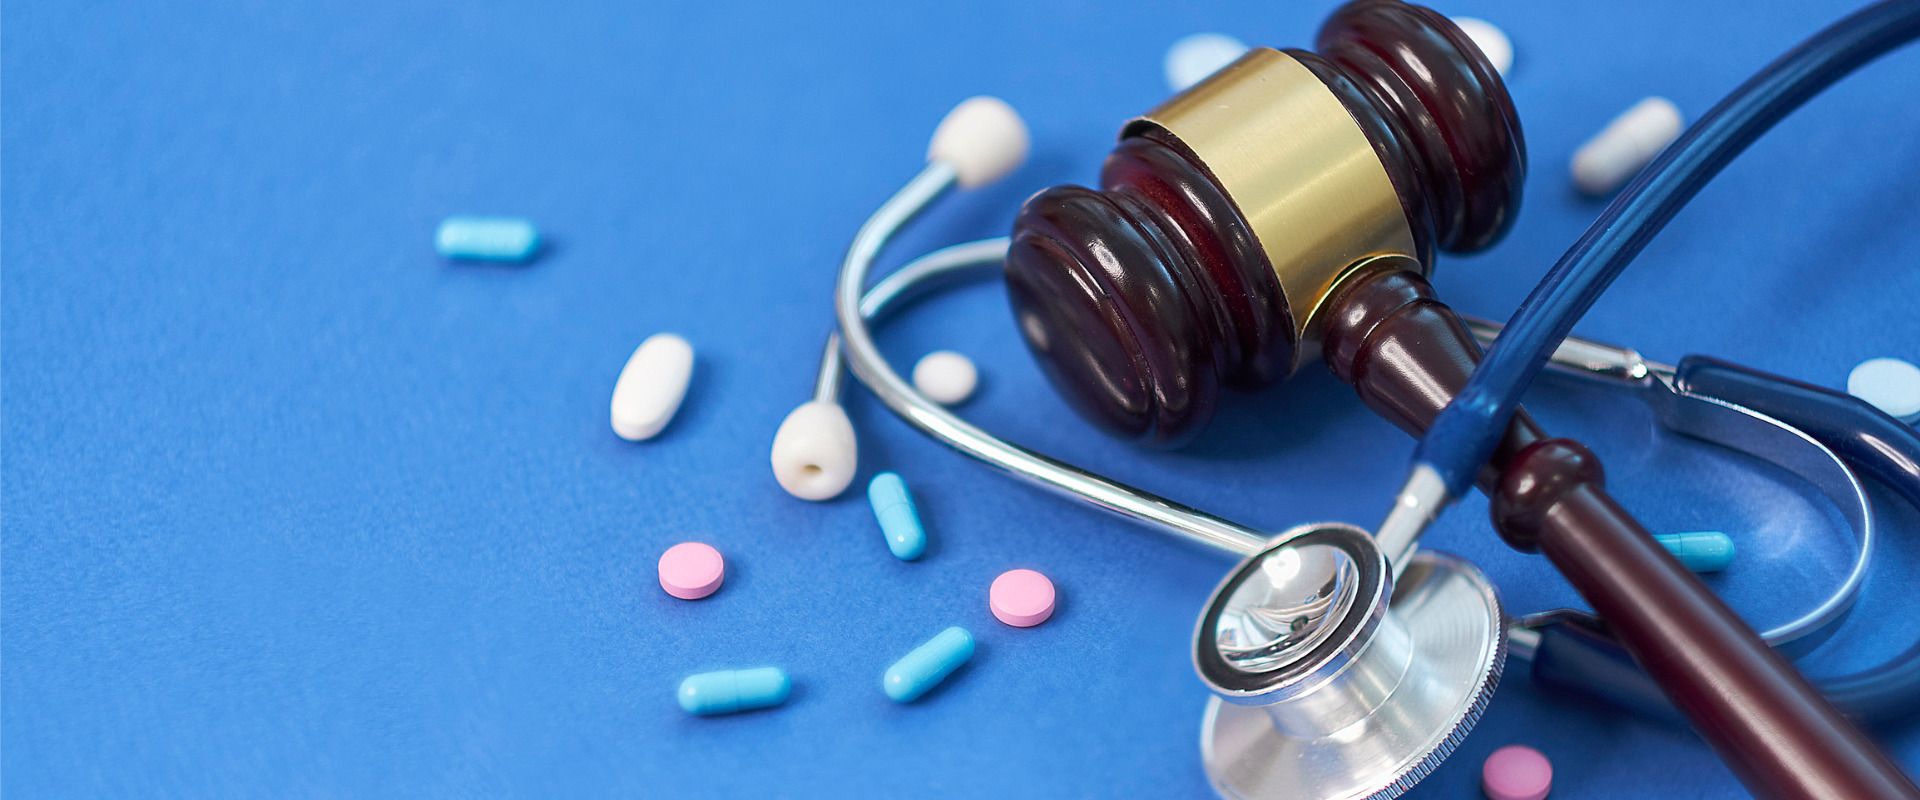 blue background with judge gavel and pills and stethoscope